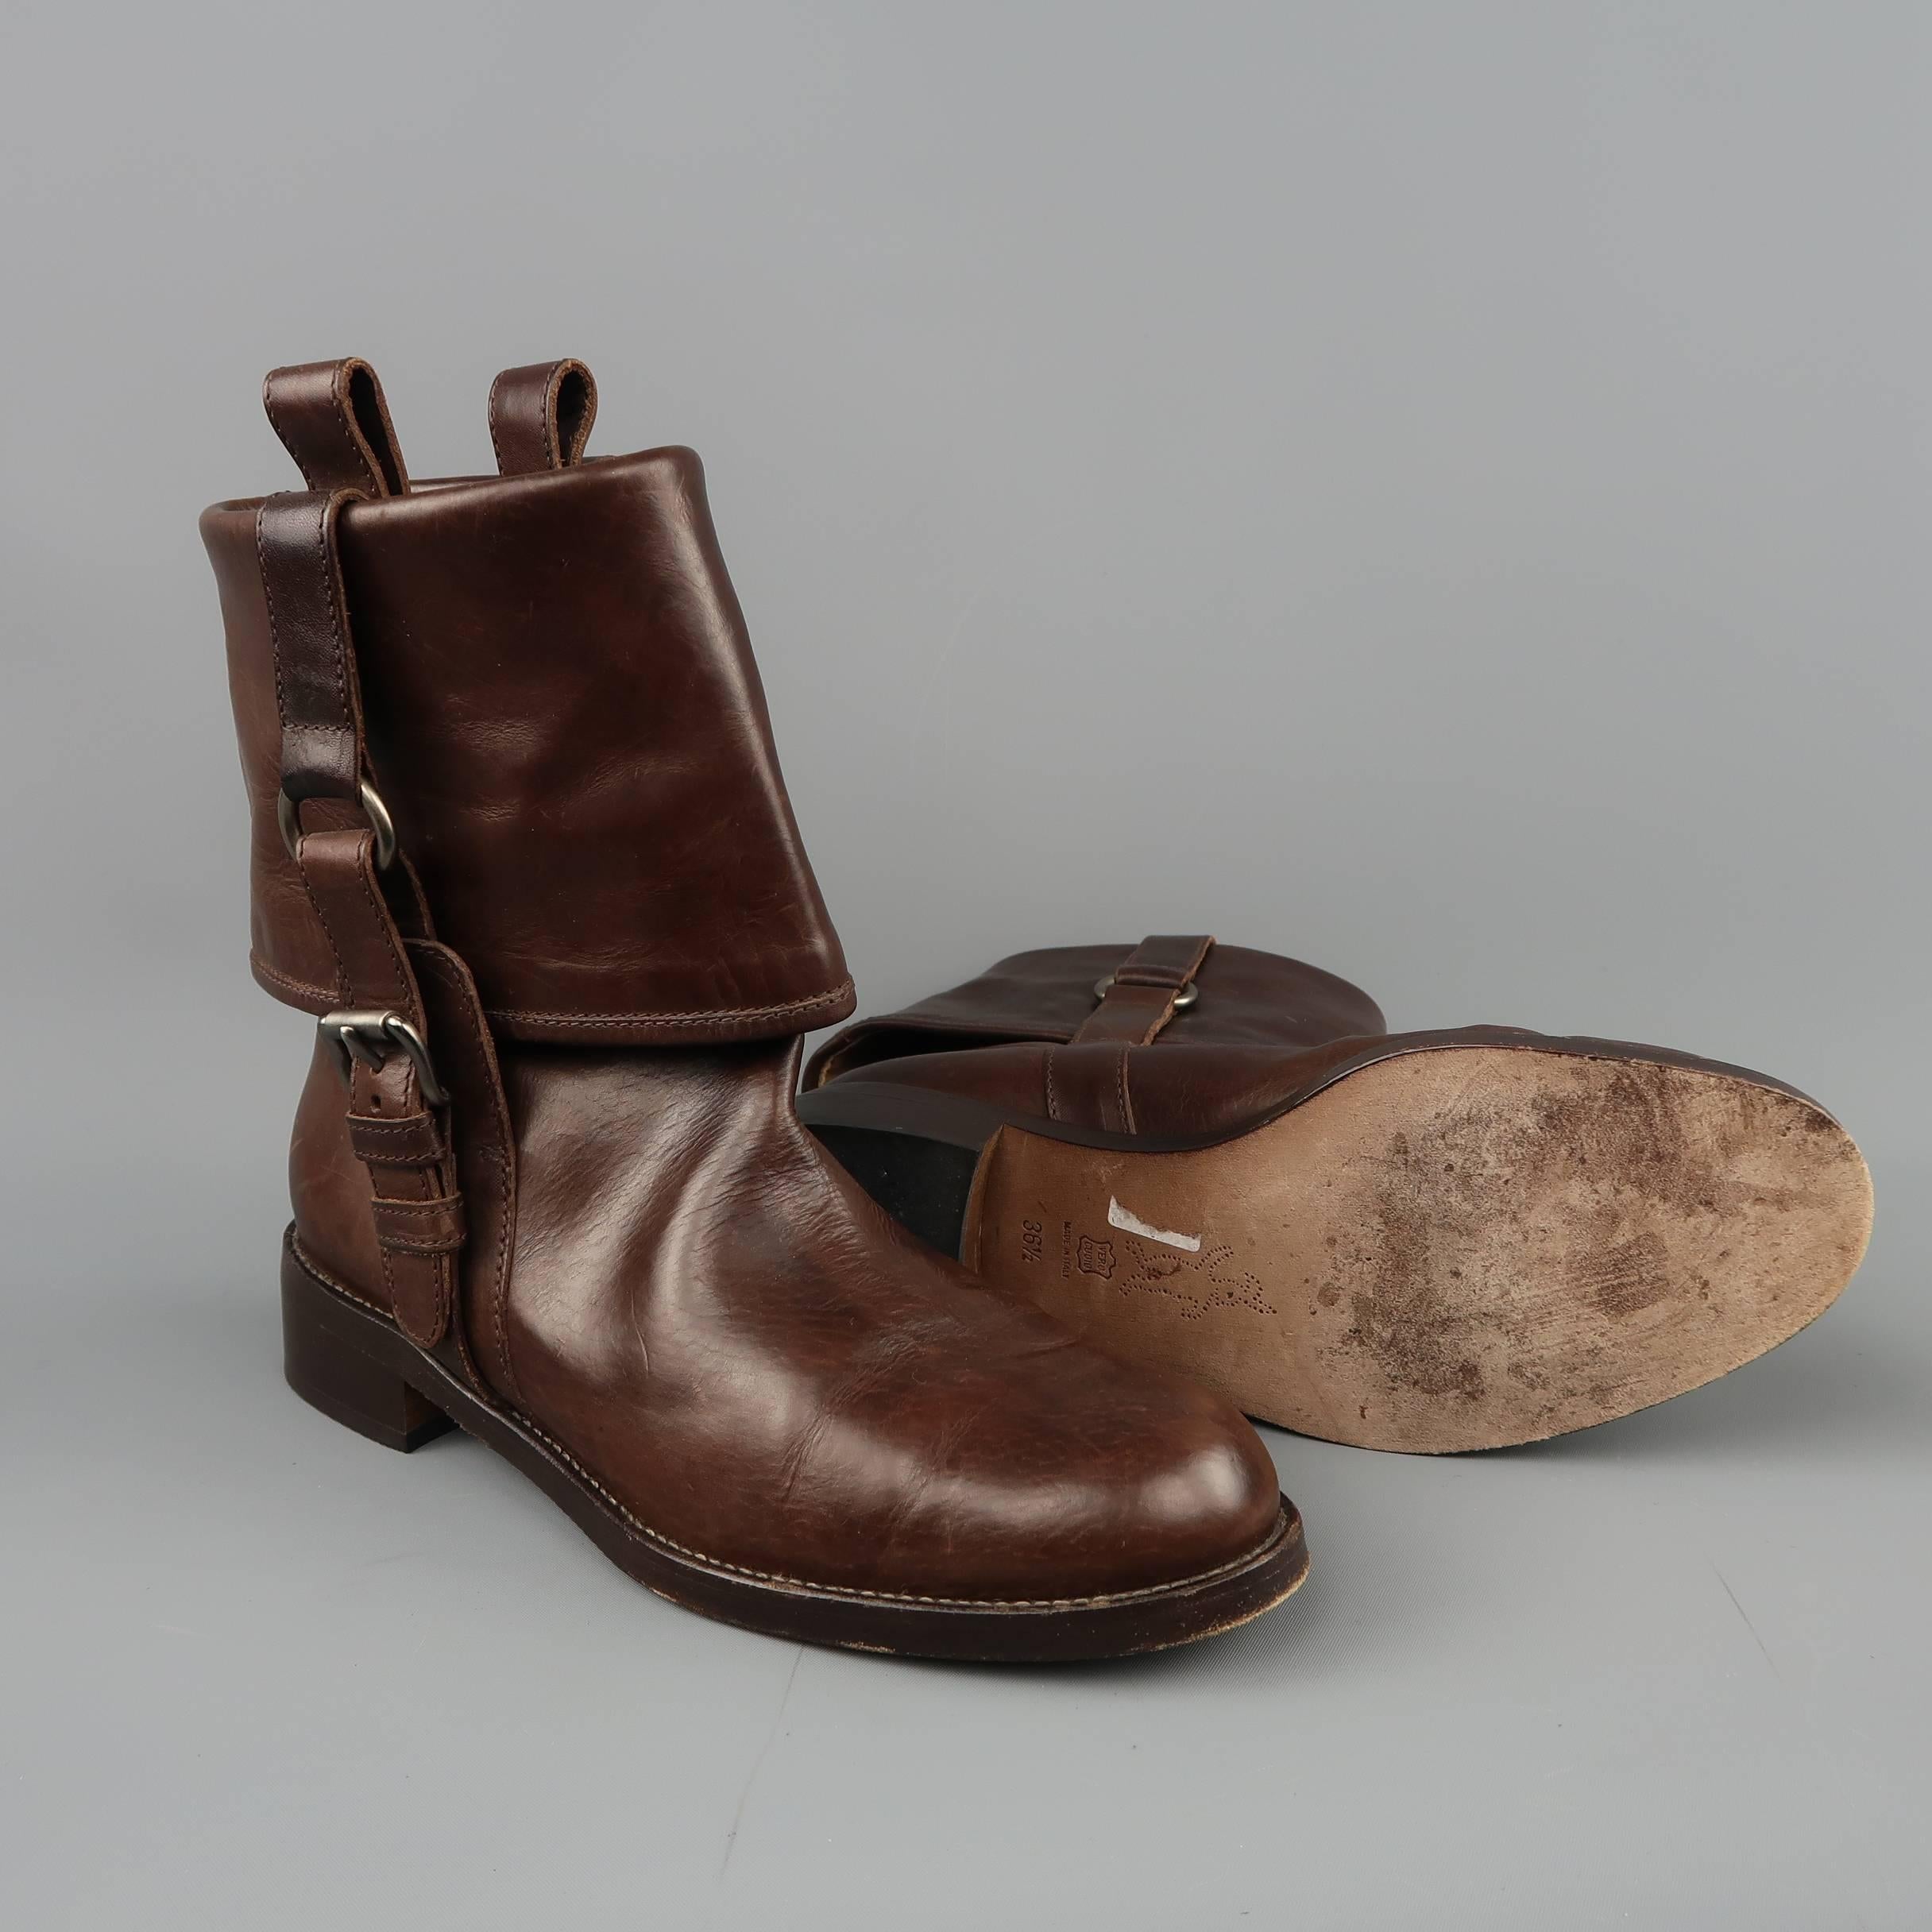 buckle detail foldover slip on boots